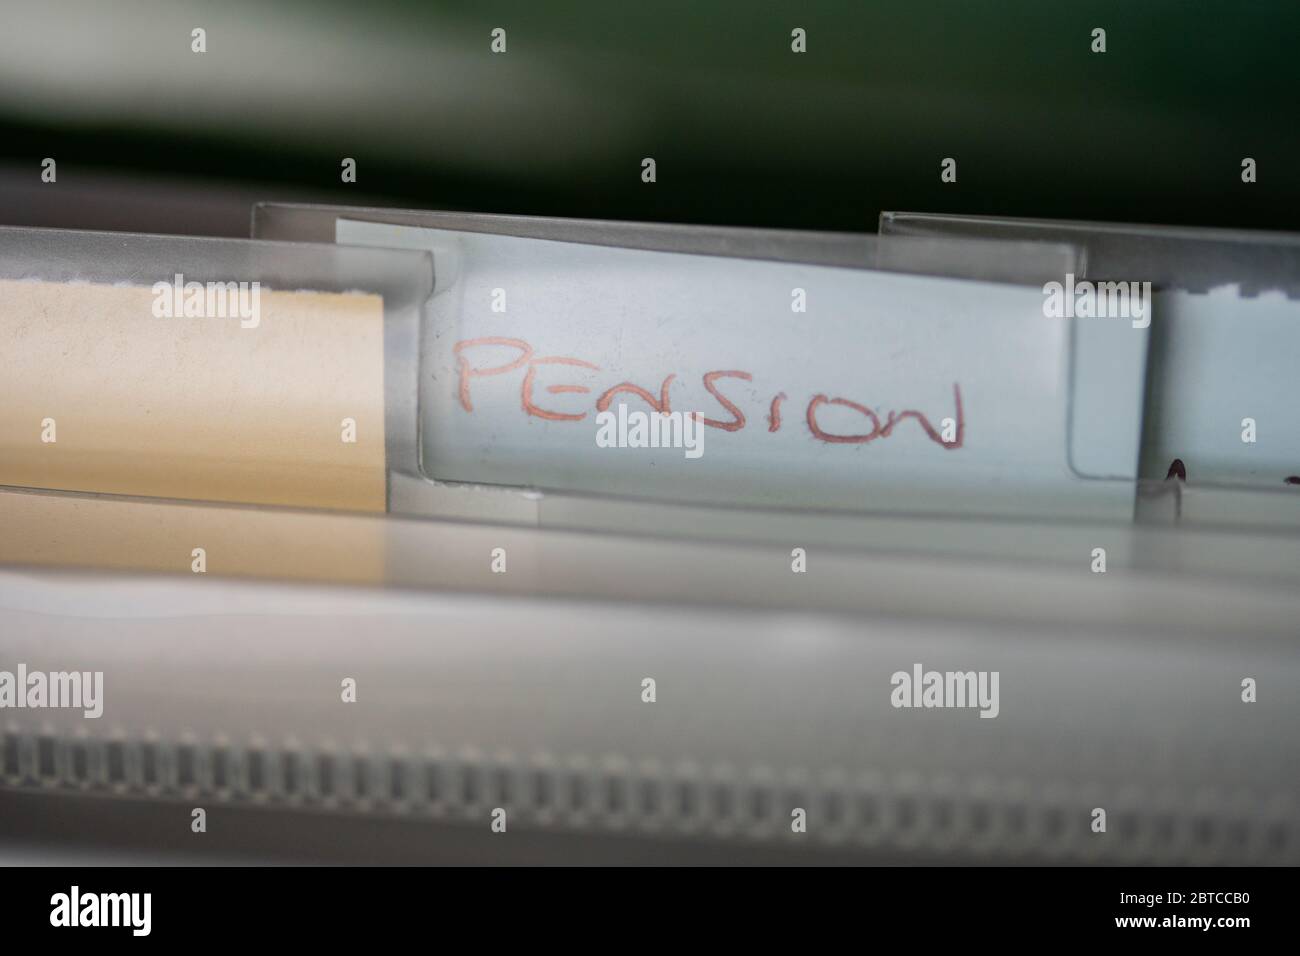 A label within a file organiser with the wording Pension.Normally a place where household bills and other important documents are kept. Stock Photo